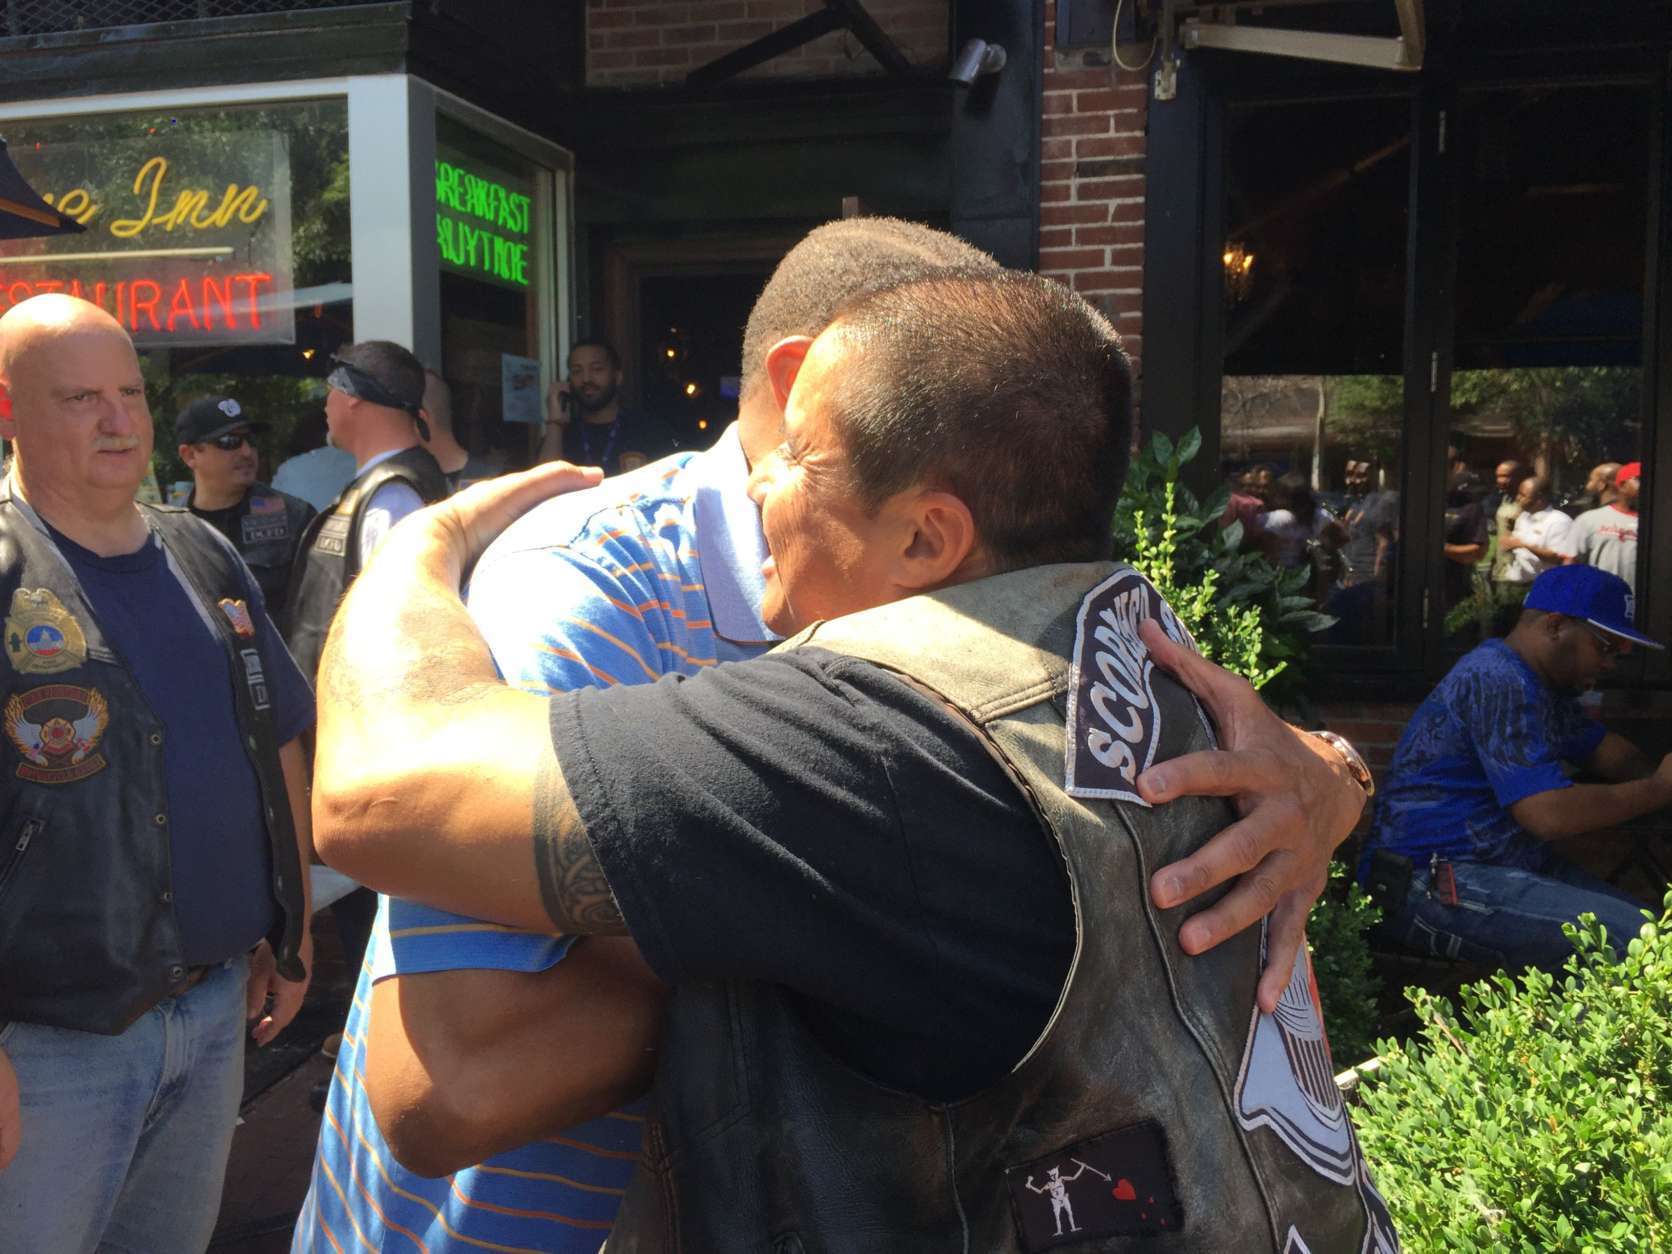 "These people are here every day protecting the citizens of this city," said Former D.C. Fire Chief Donald Edwards (left). He's shown here hugging Robert Alvarado, president of the Scorched Souls Motorcycle Club, which is made up of D.C. firefighters. They were among the first responders and others gathered at Tune Inn on Capitol Hill Wednesday for a fundraiser to help the family of Firefighter Dane Smothers Jr. Smothers was critically injured Aug. 3 preparing to battle a blaze in Northeast. (WTOP/Kristi King)